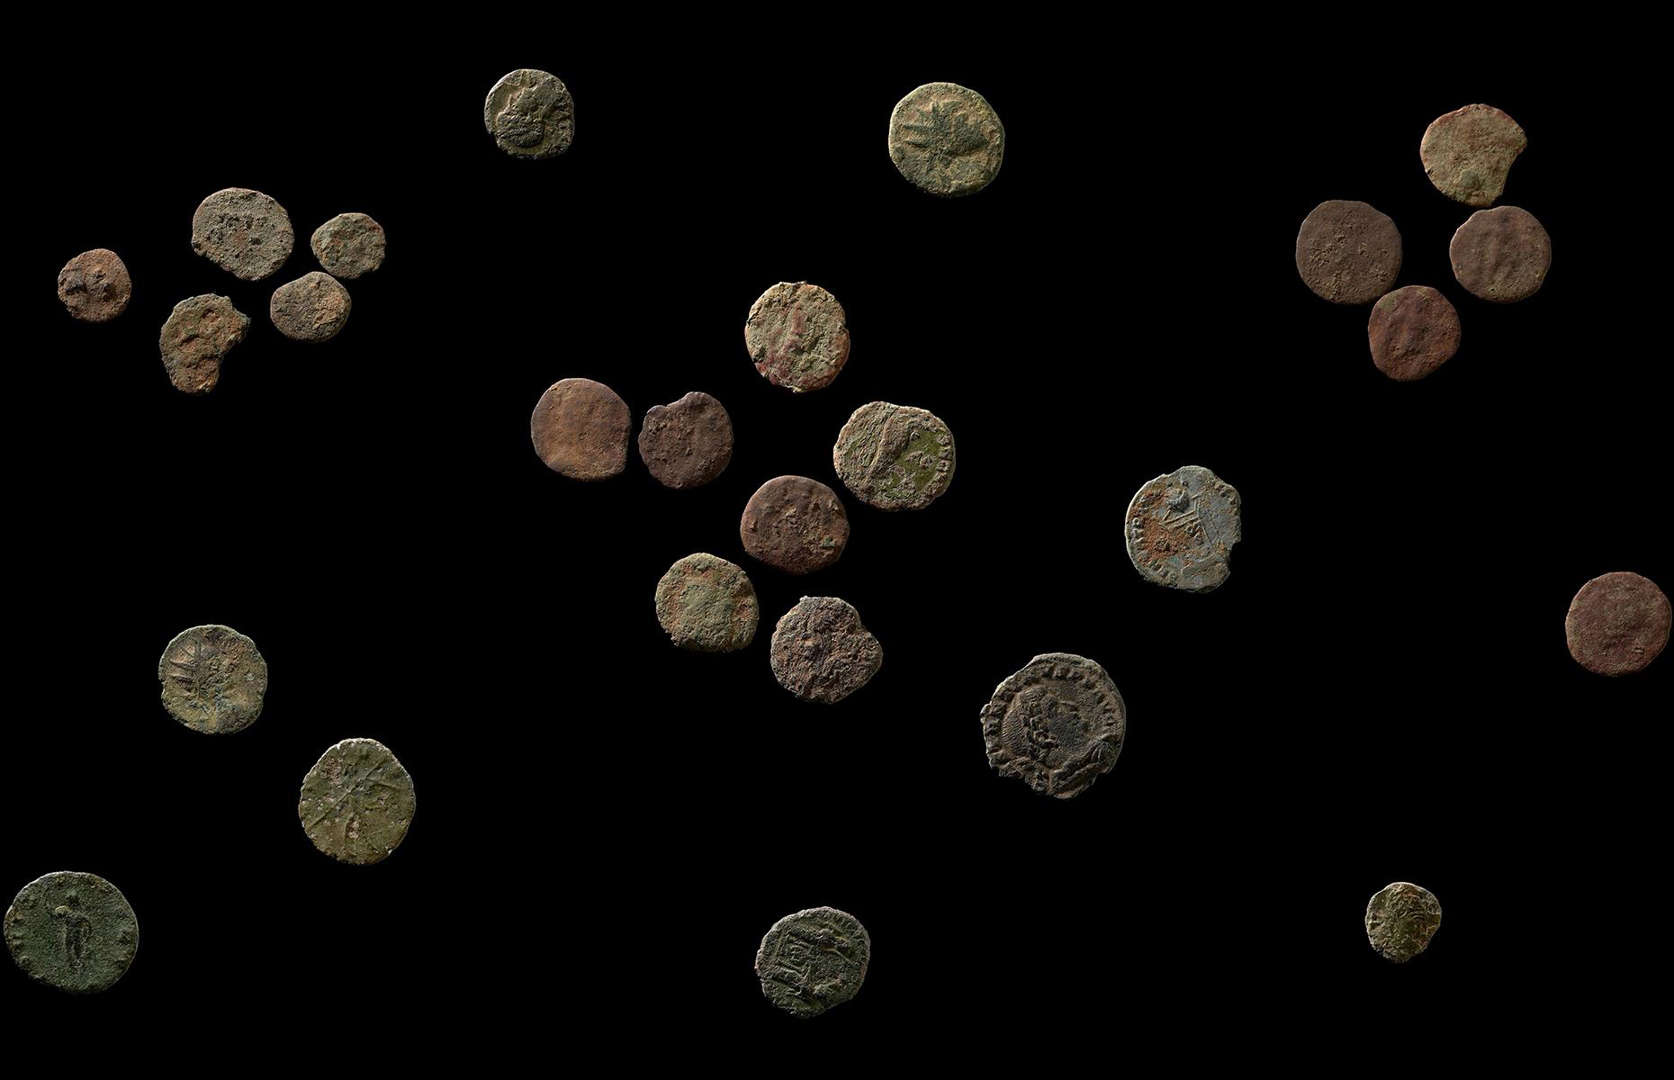 A selection of coins found at the site.